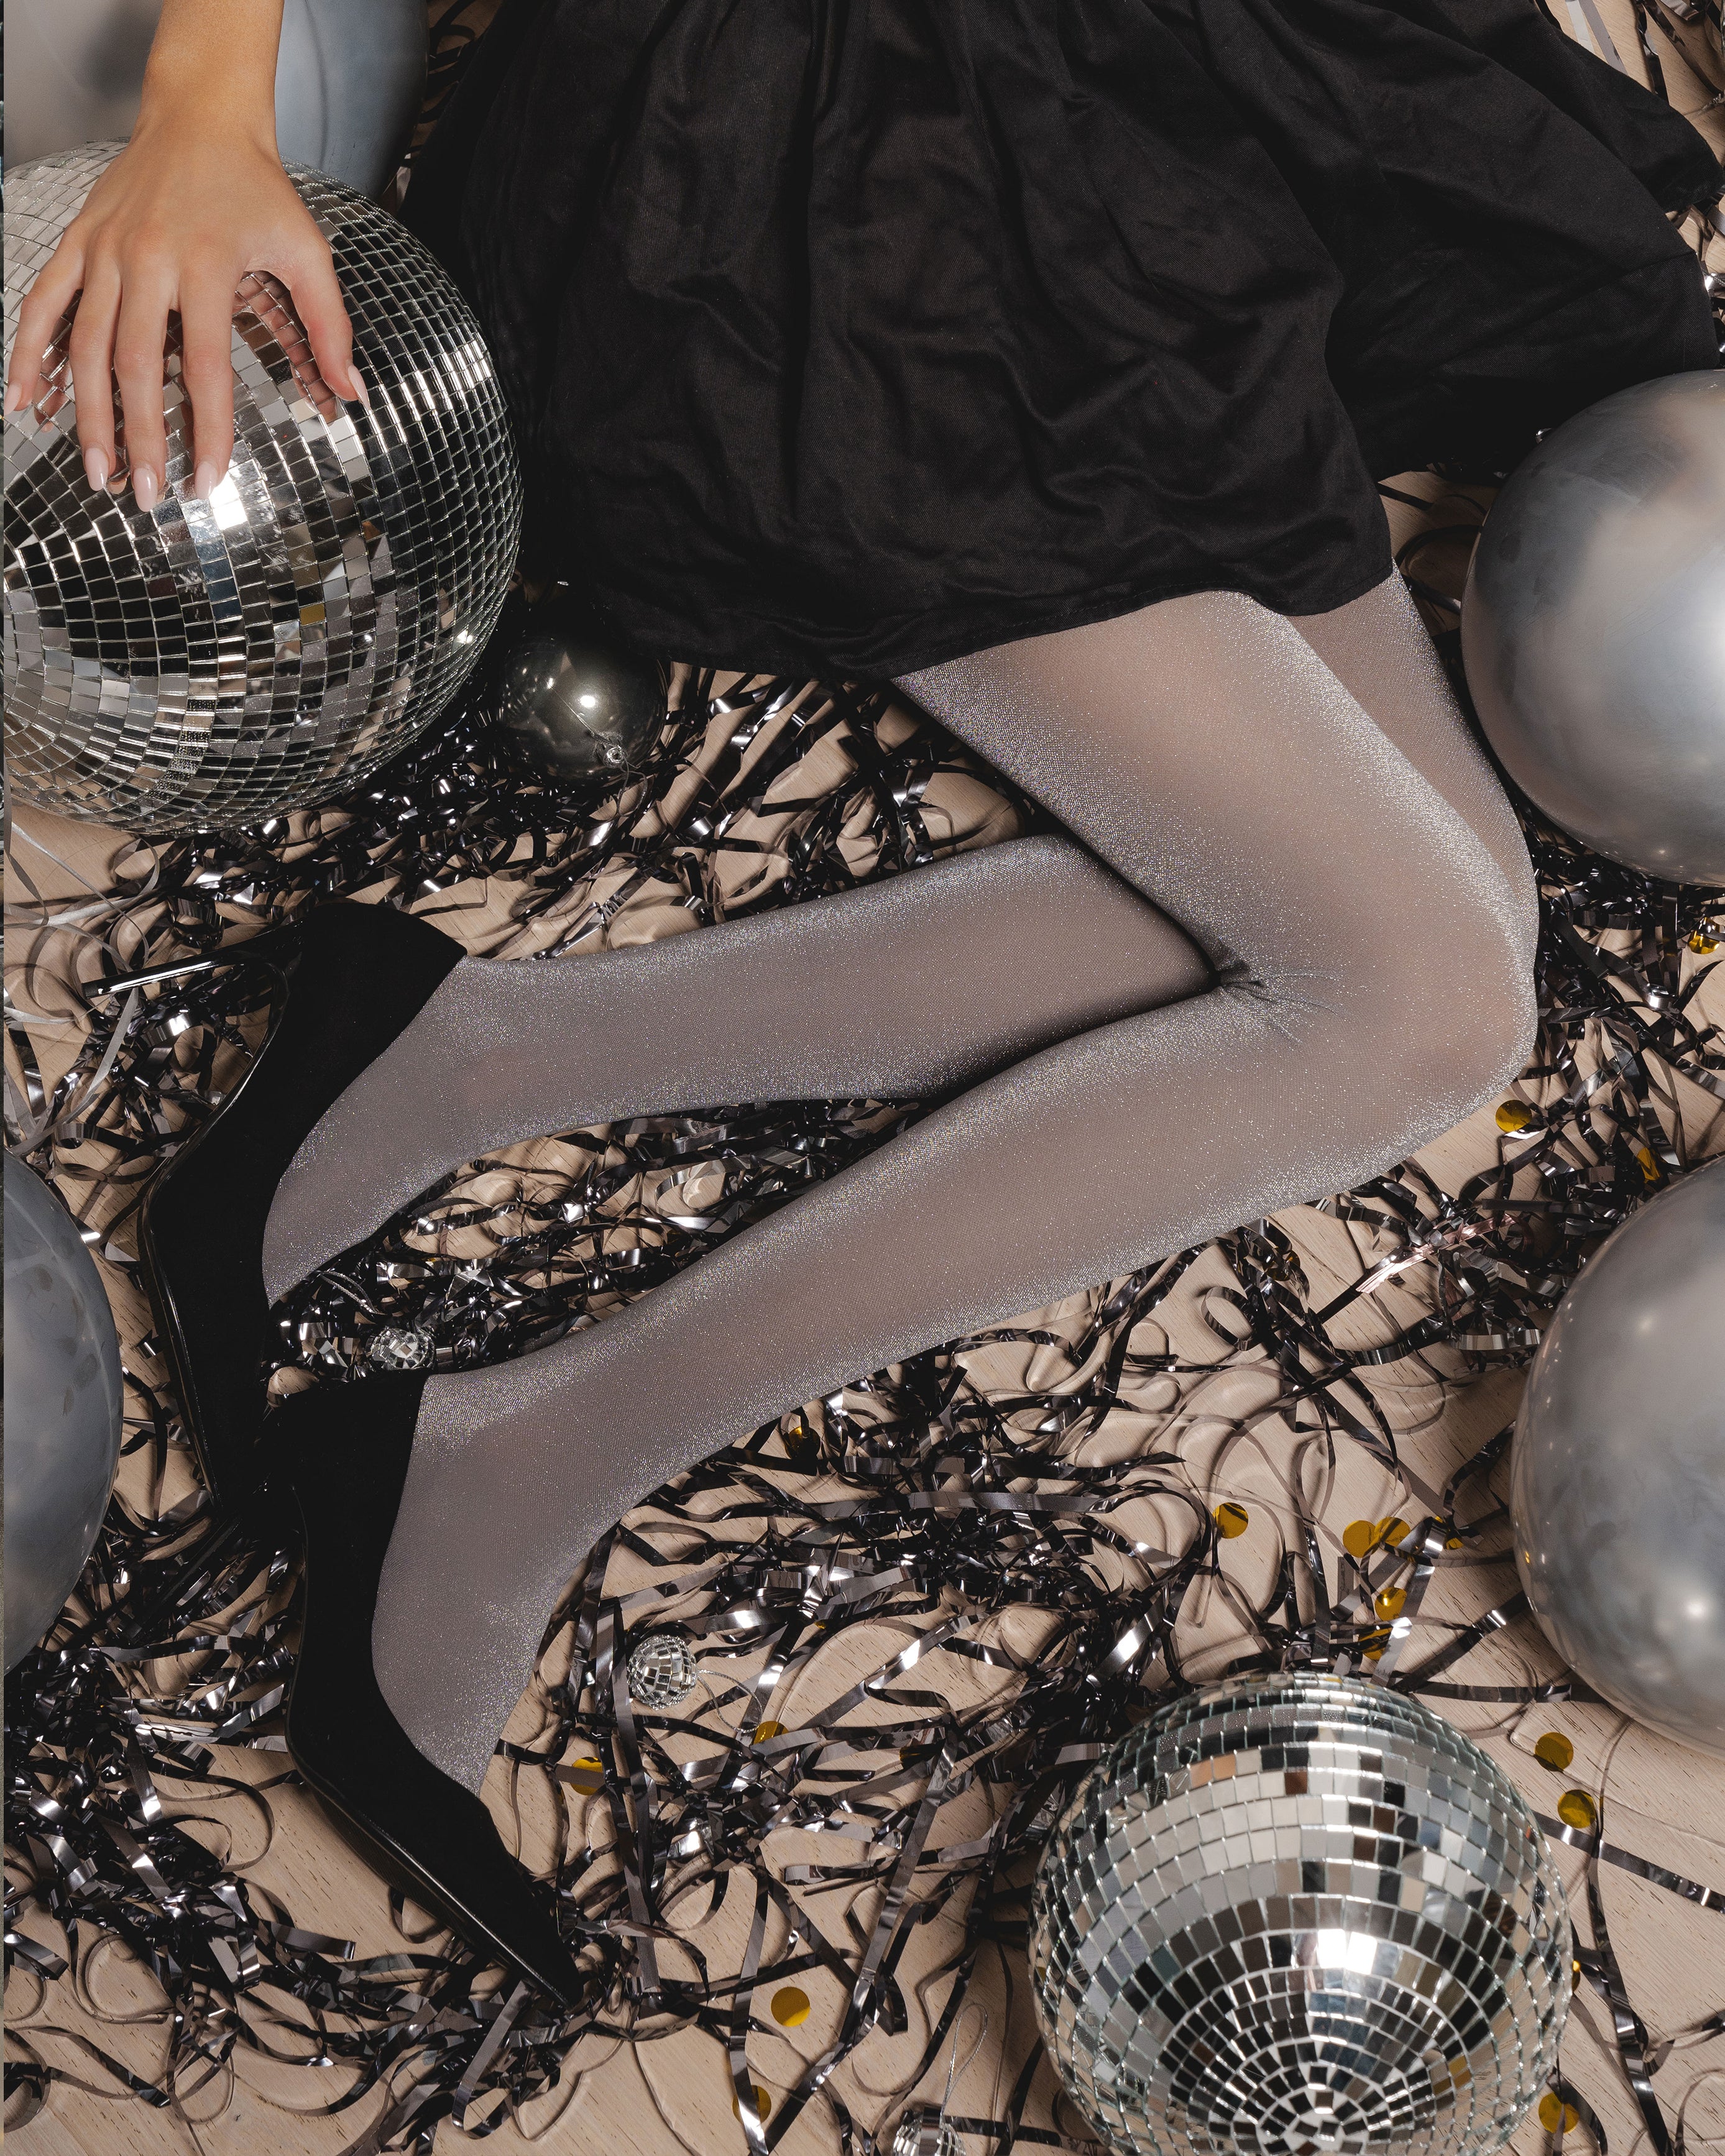 Sheer Metallic Tights in silver | Hosiery | Tights | Party | Christmas | new years | Glam | Going Out | Halloween | Costume | Glitter | Sparkly | Accessories | Women's Accessories | Accessory | Autumn | Winter | Fall | Streetwear | style